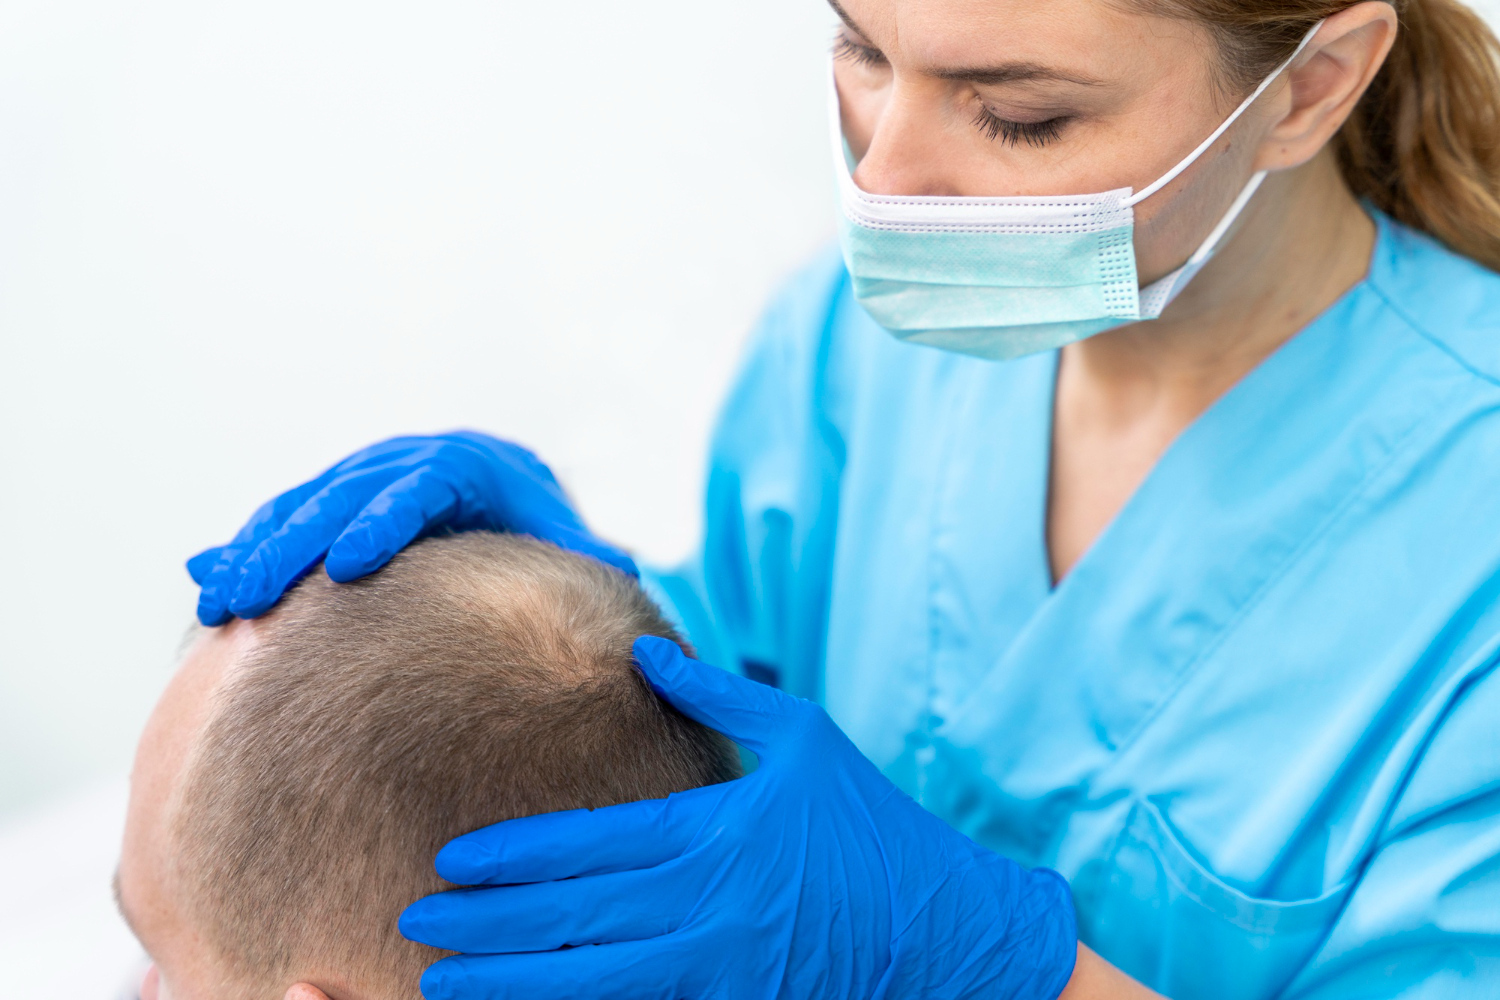 androgenetic alopecia causes